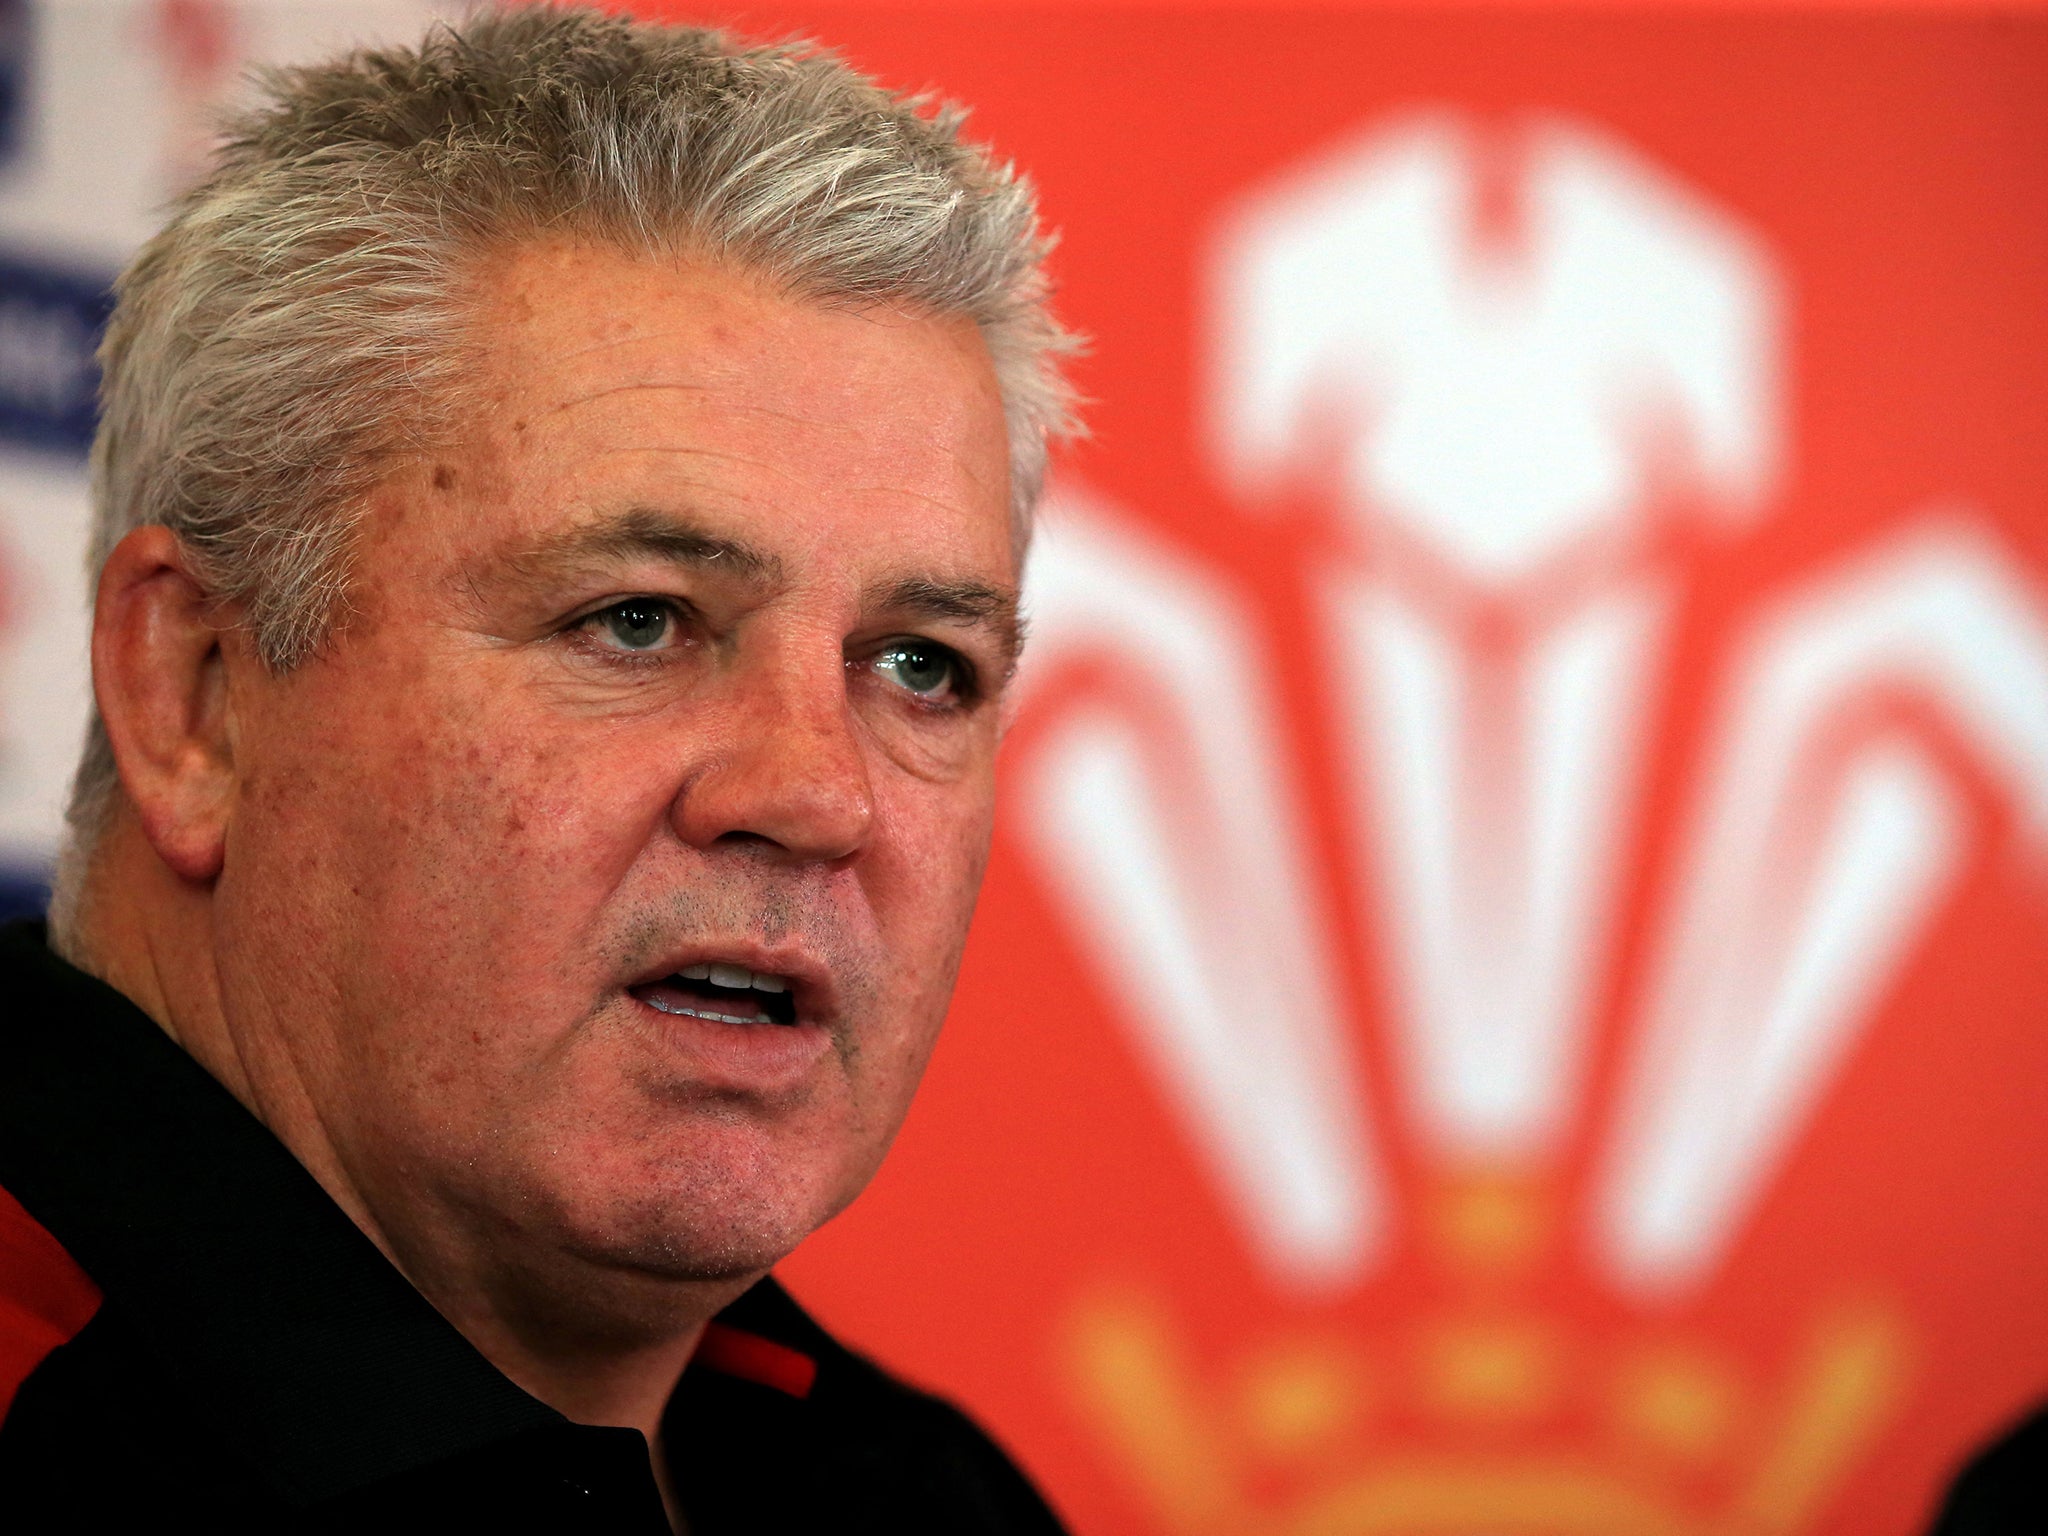 Gatland apologised for his comments